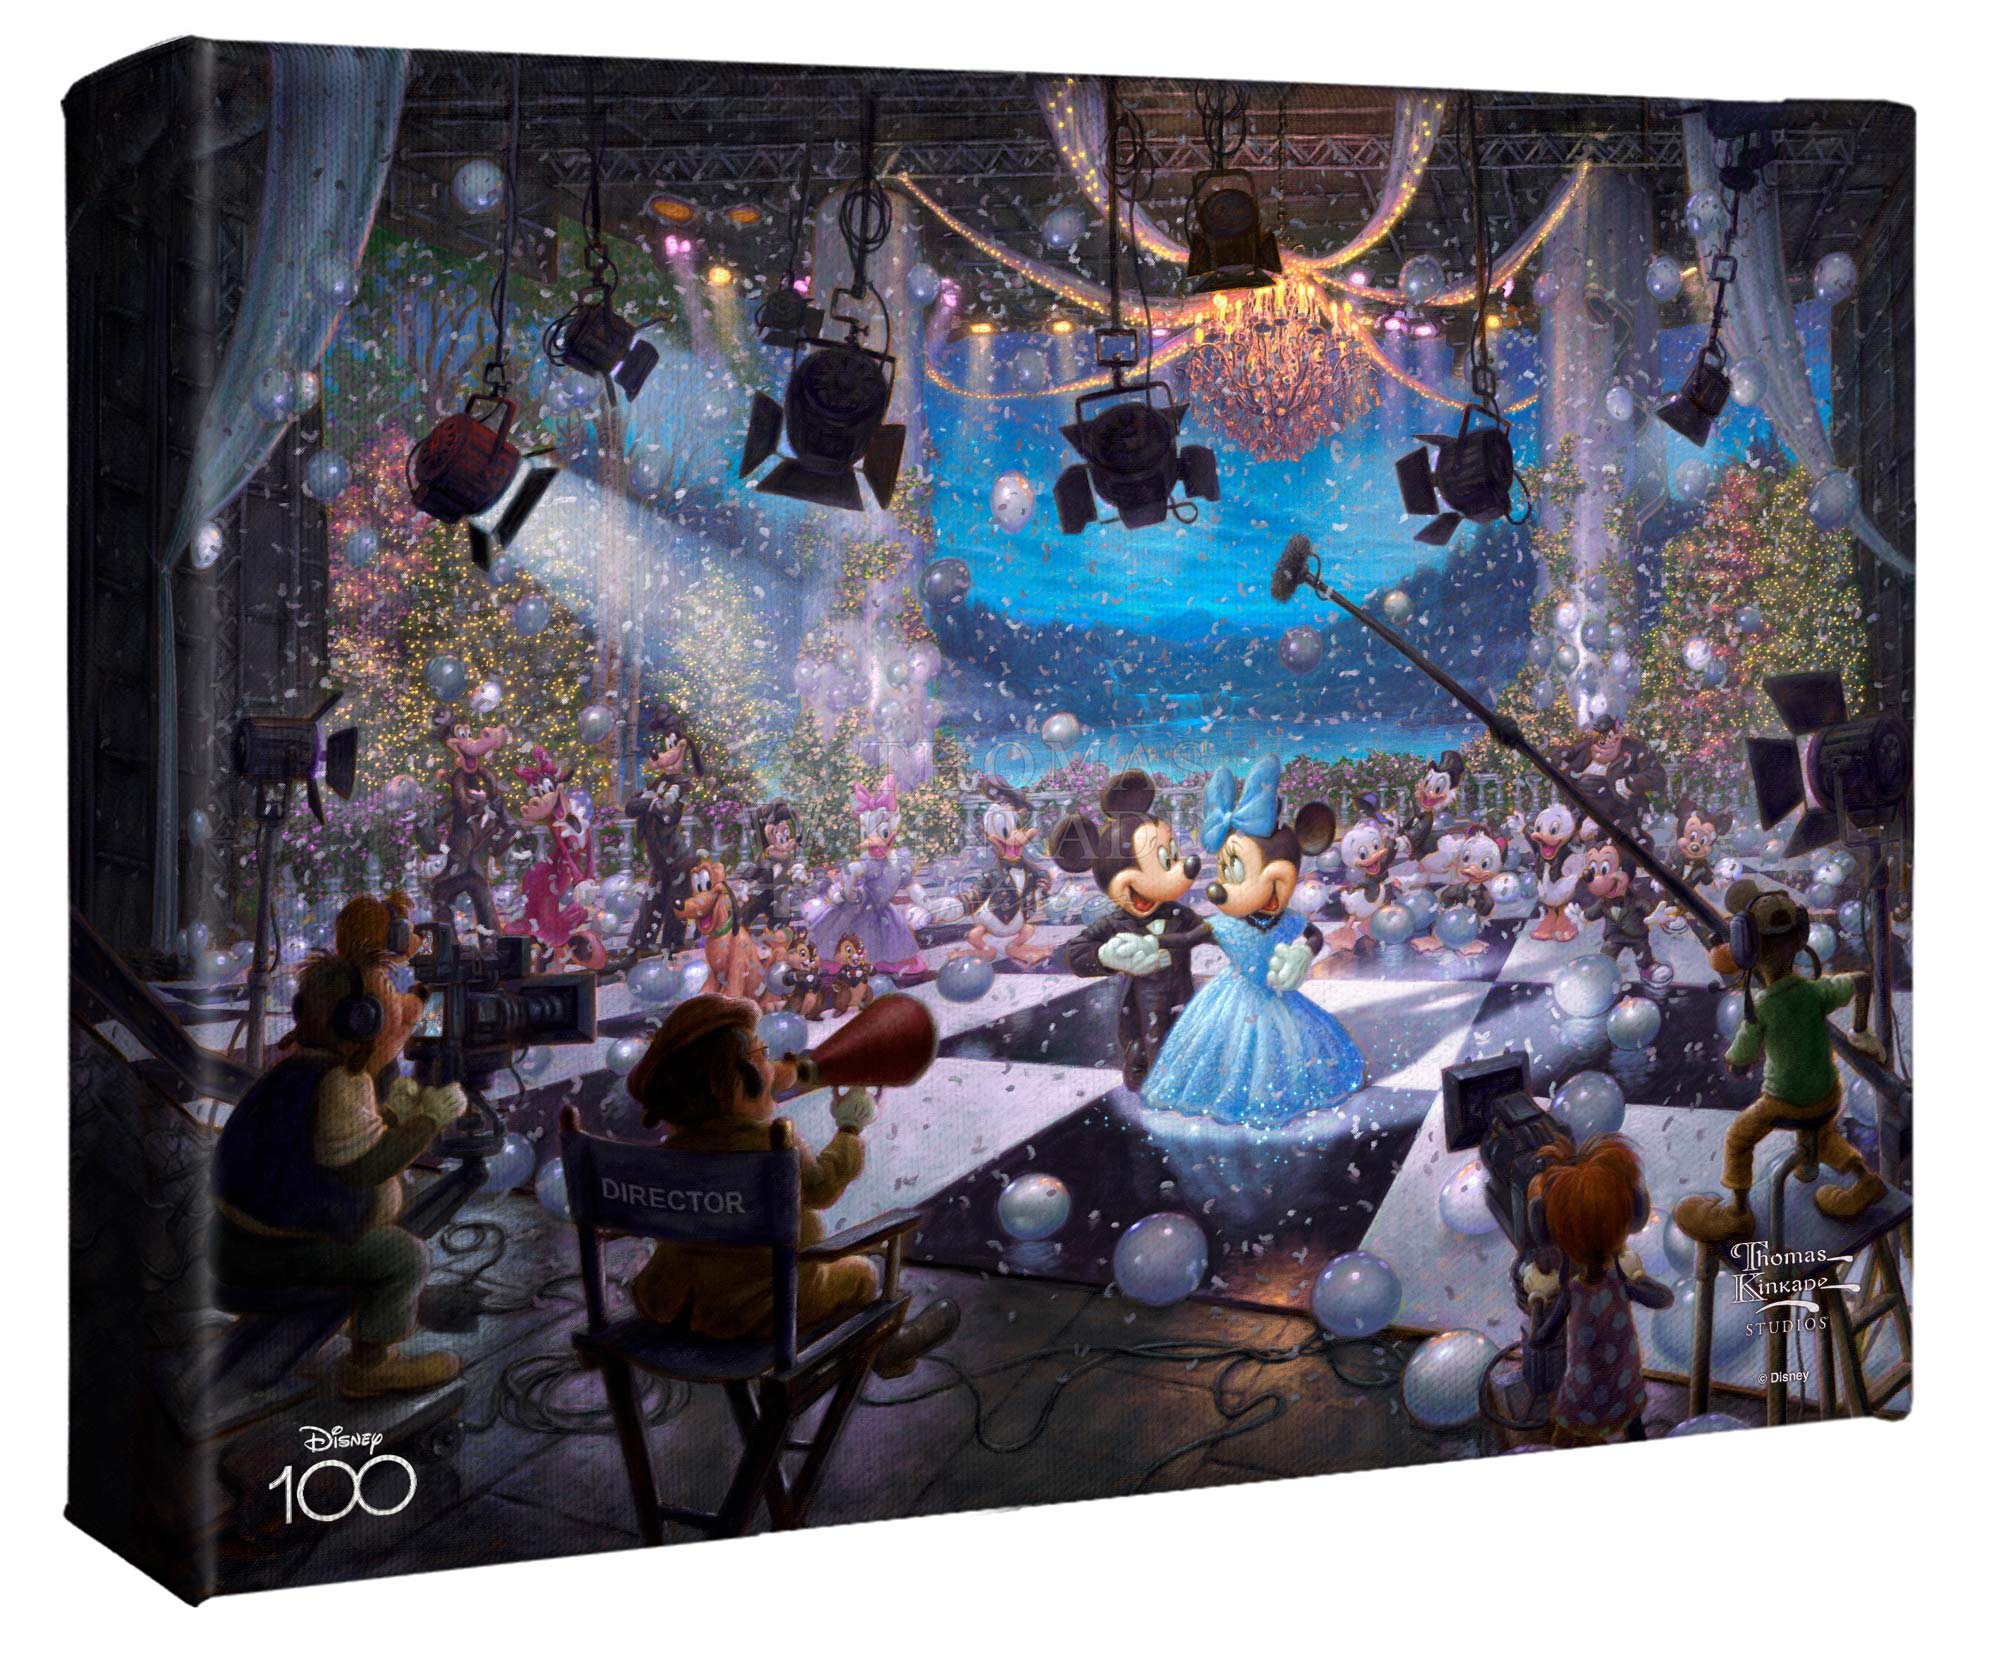 Disney 100th Clelebration - 8" x 10" Gallery Wrapped Canvas